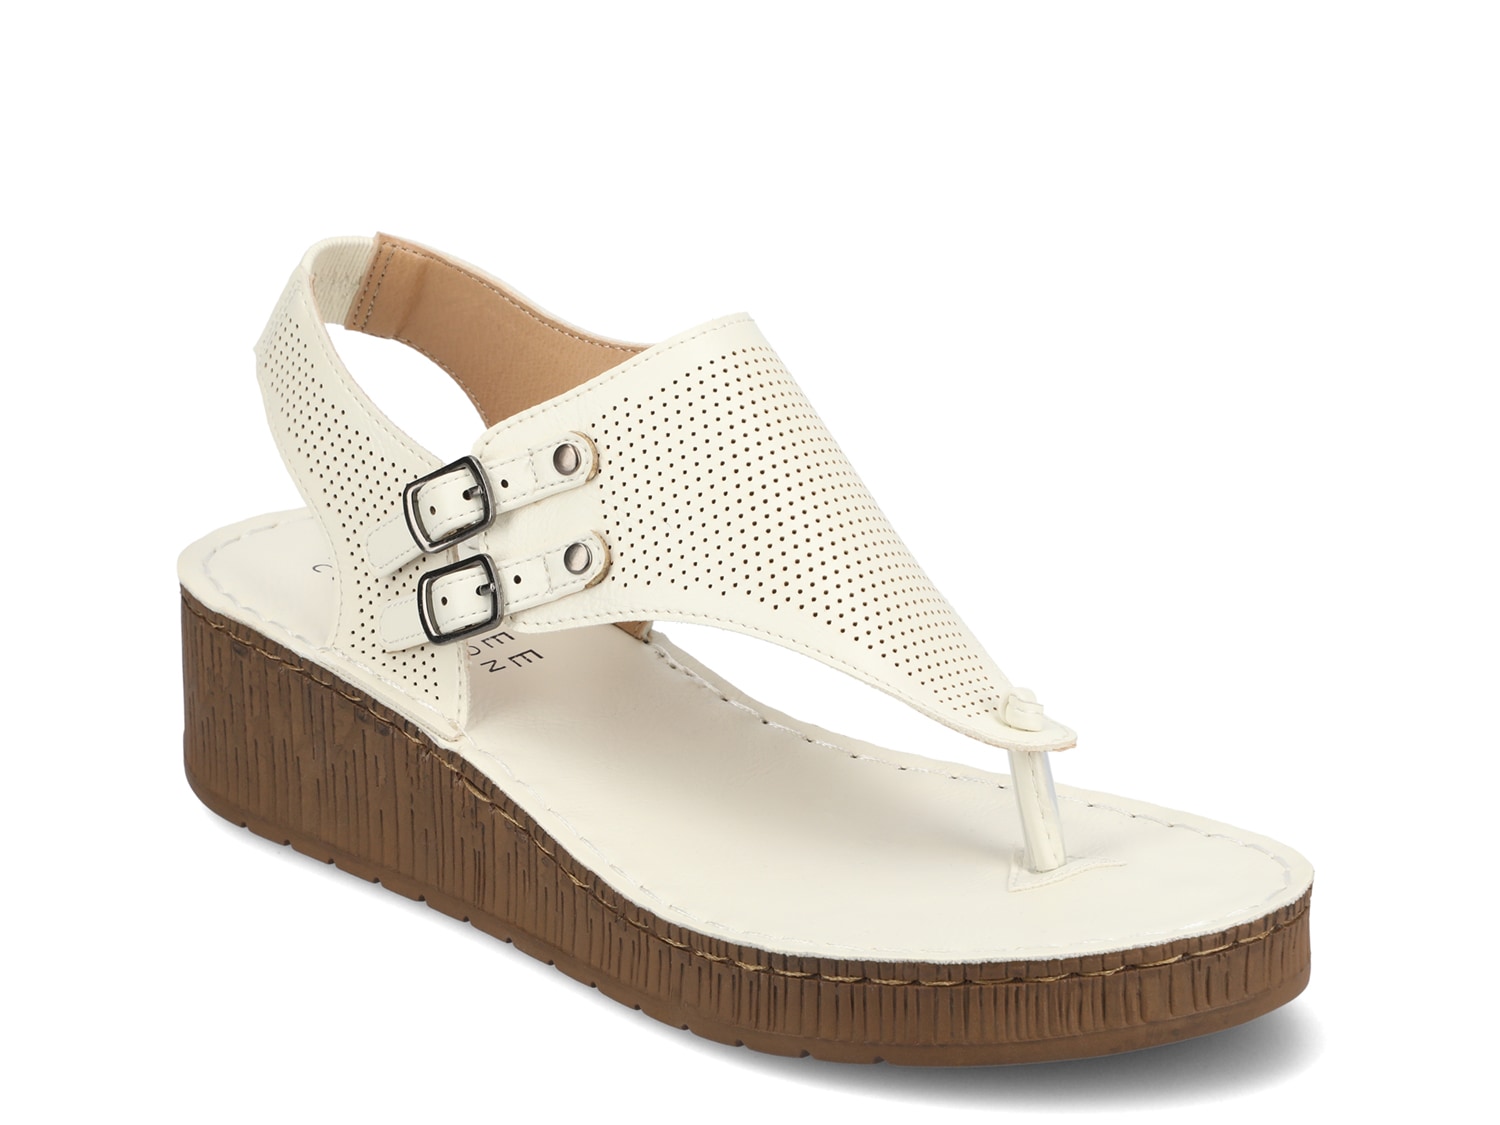 Journee Collection Mckell Wedge Sandal - Free Shipping | DSW